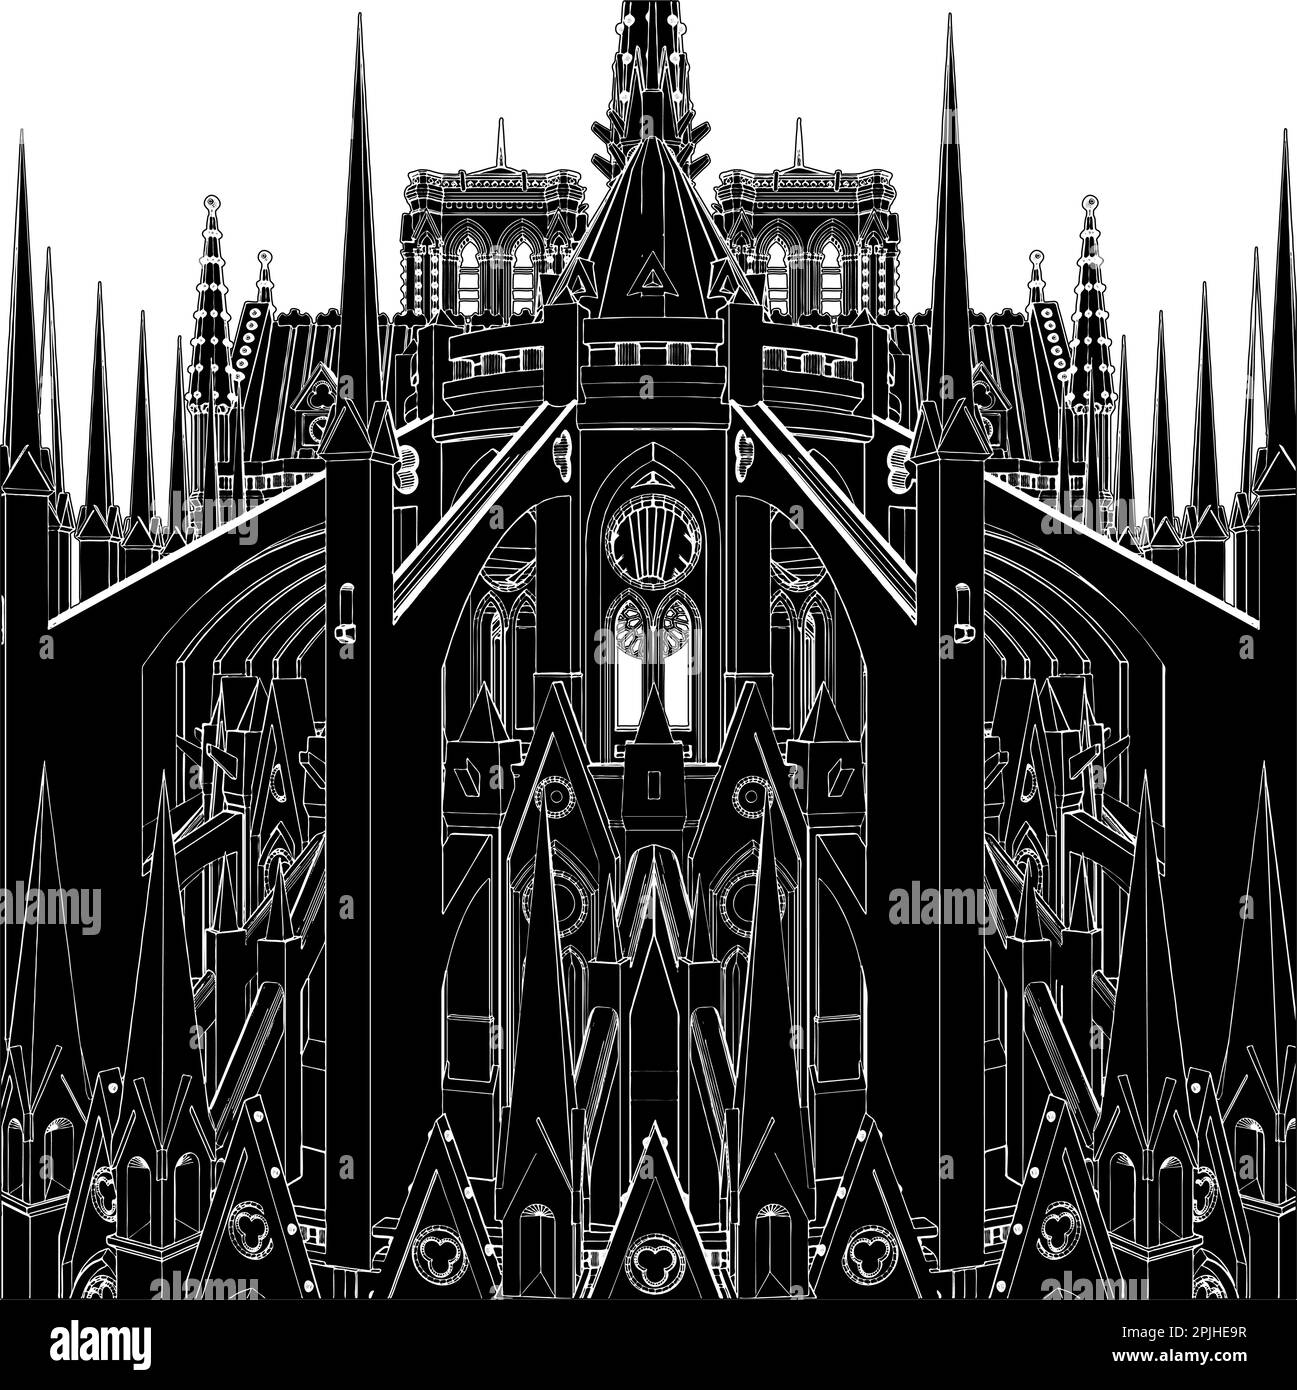 Gothic Cathedral Vector. Illustration Isolated On White Background. A Sketch Drawing Vector Illustration Of A Gothic Cathedral. Stock Vector